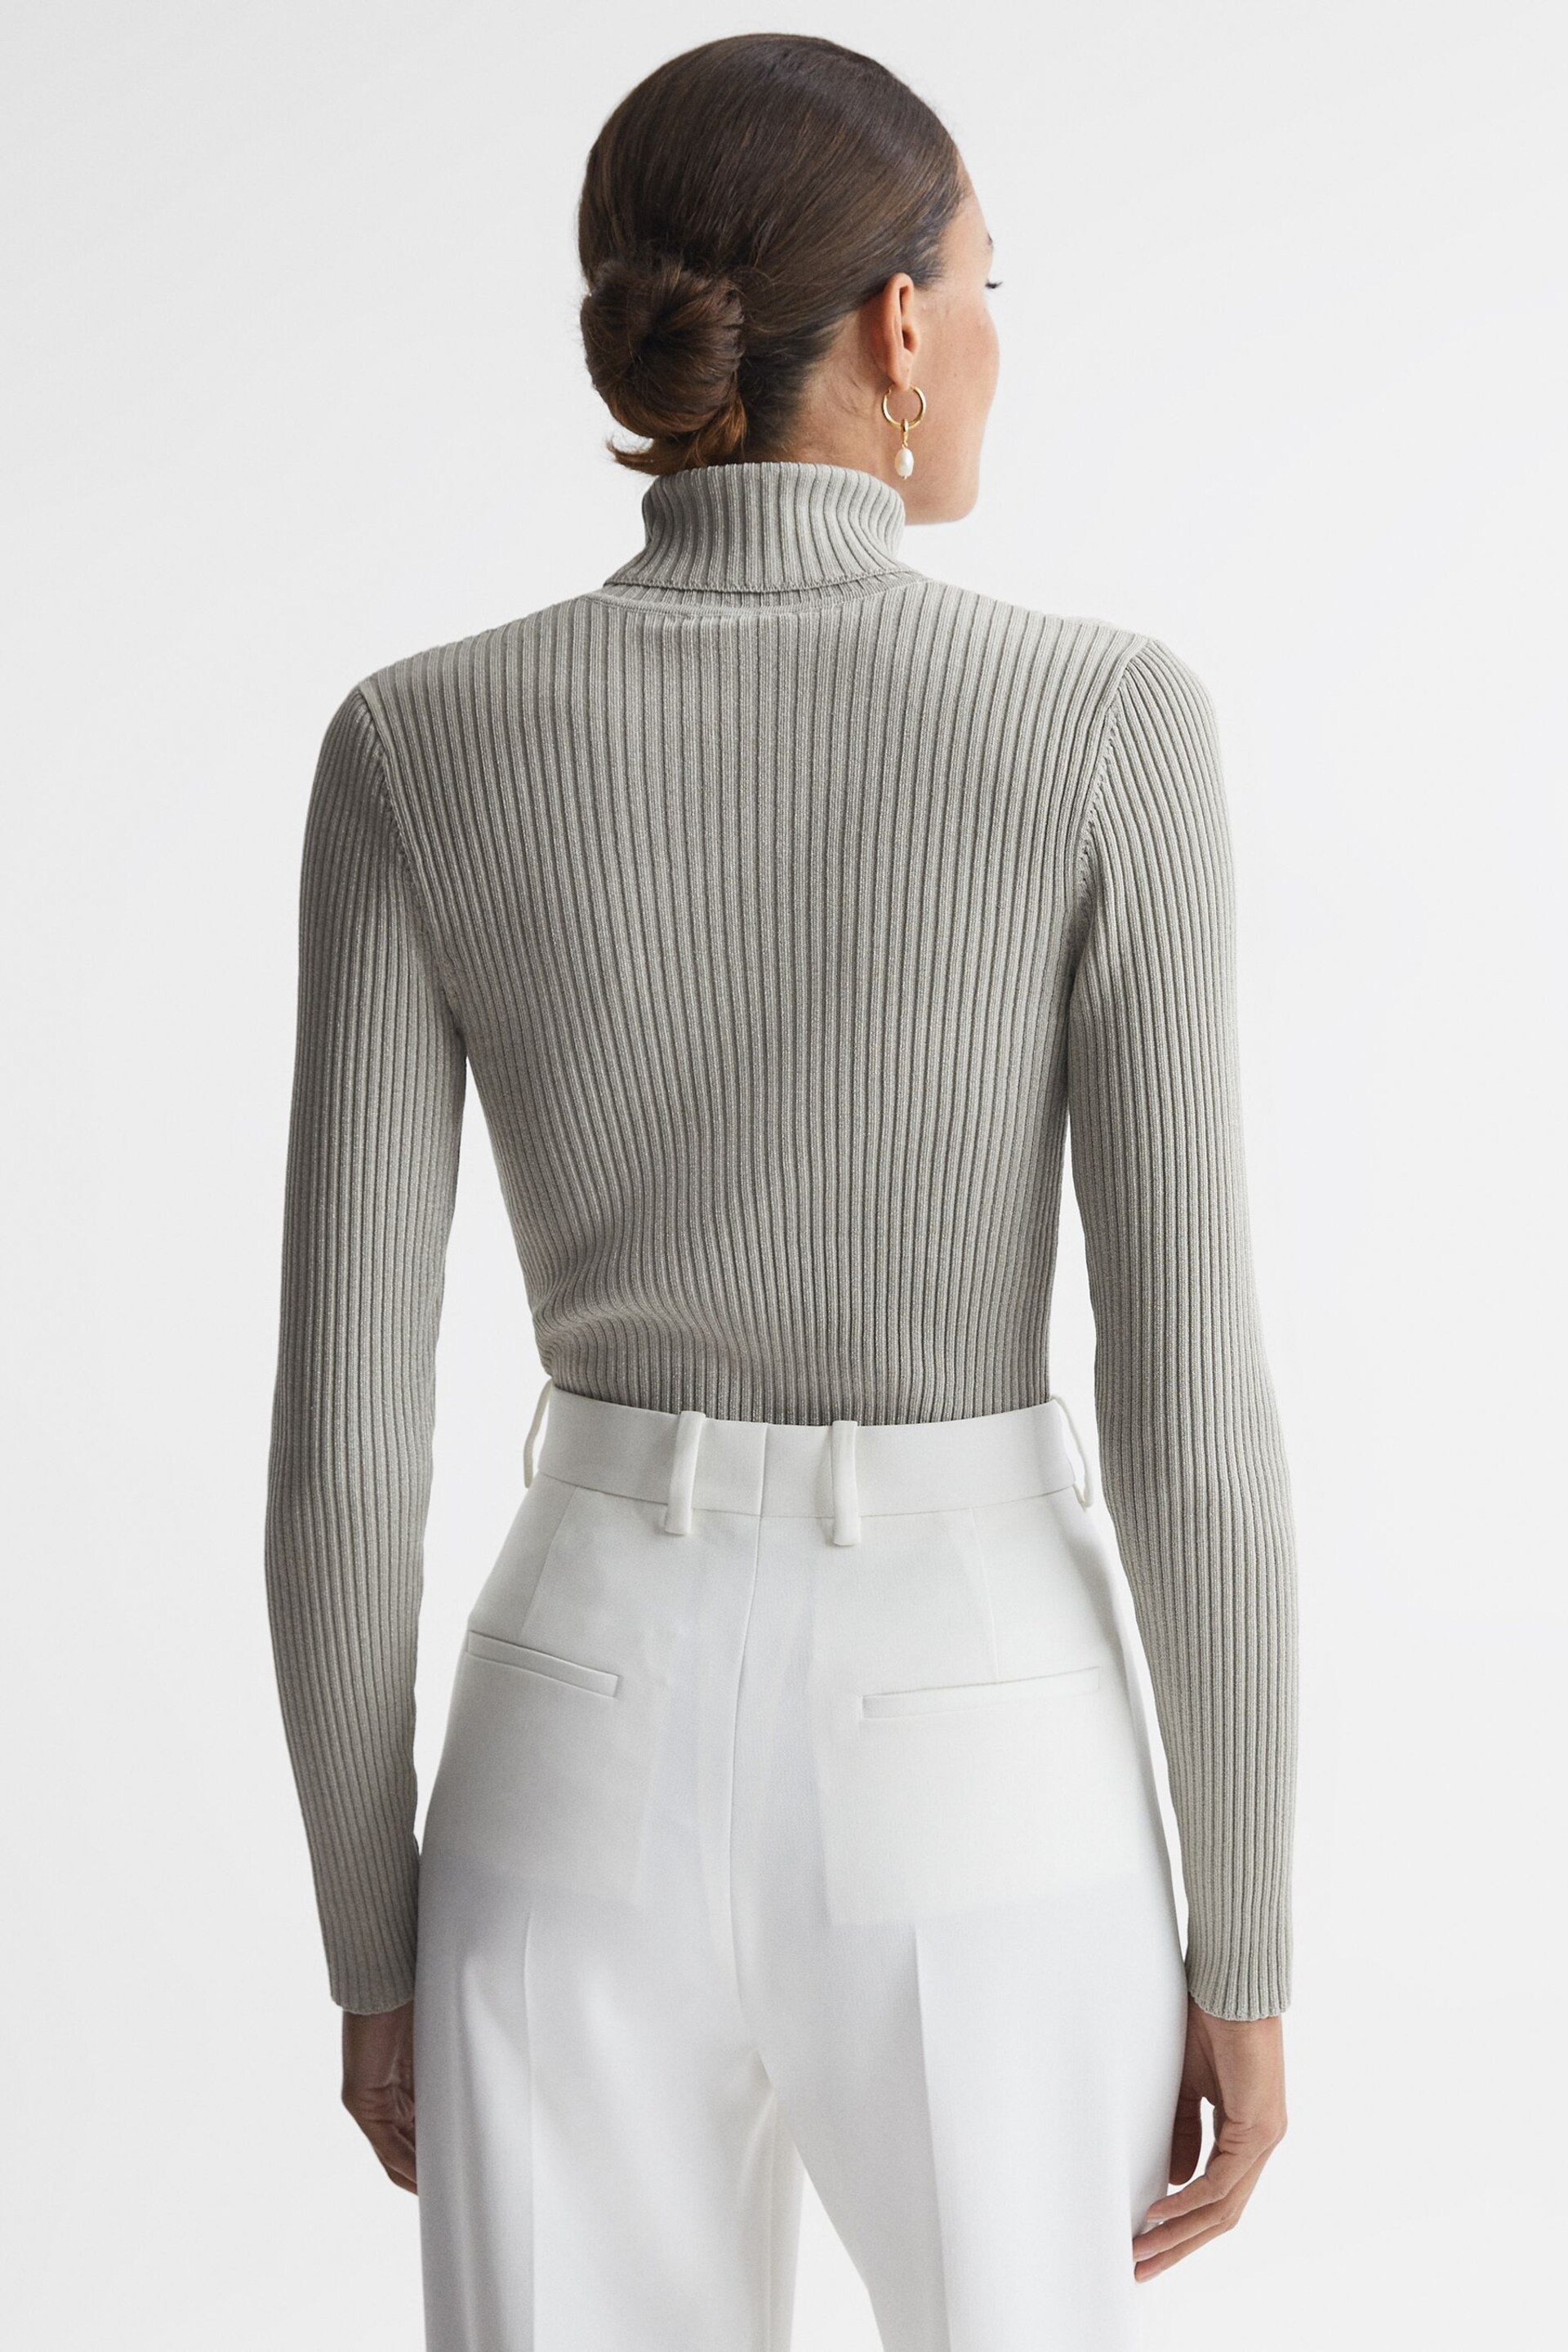 Reiss Silver Tanya Metallic Ribbed Mesh Panel Funnel Neck Top - Image 5 of 6